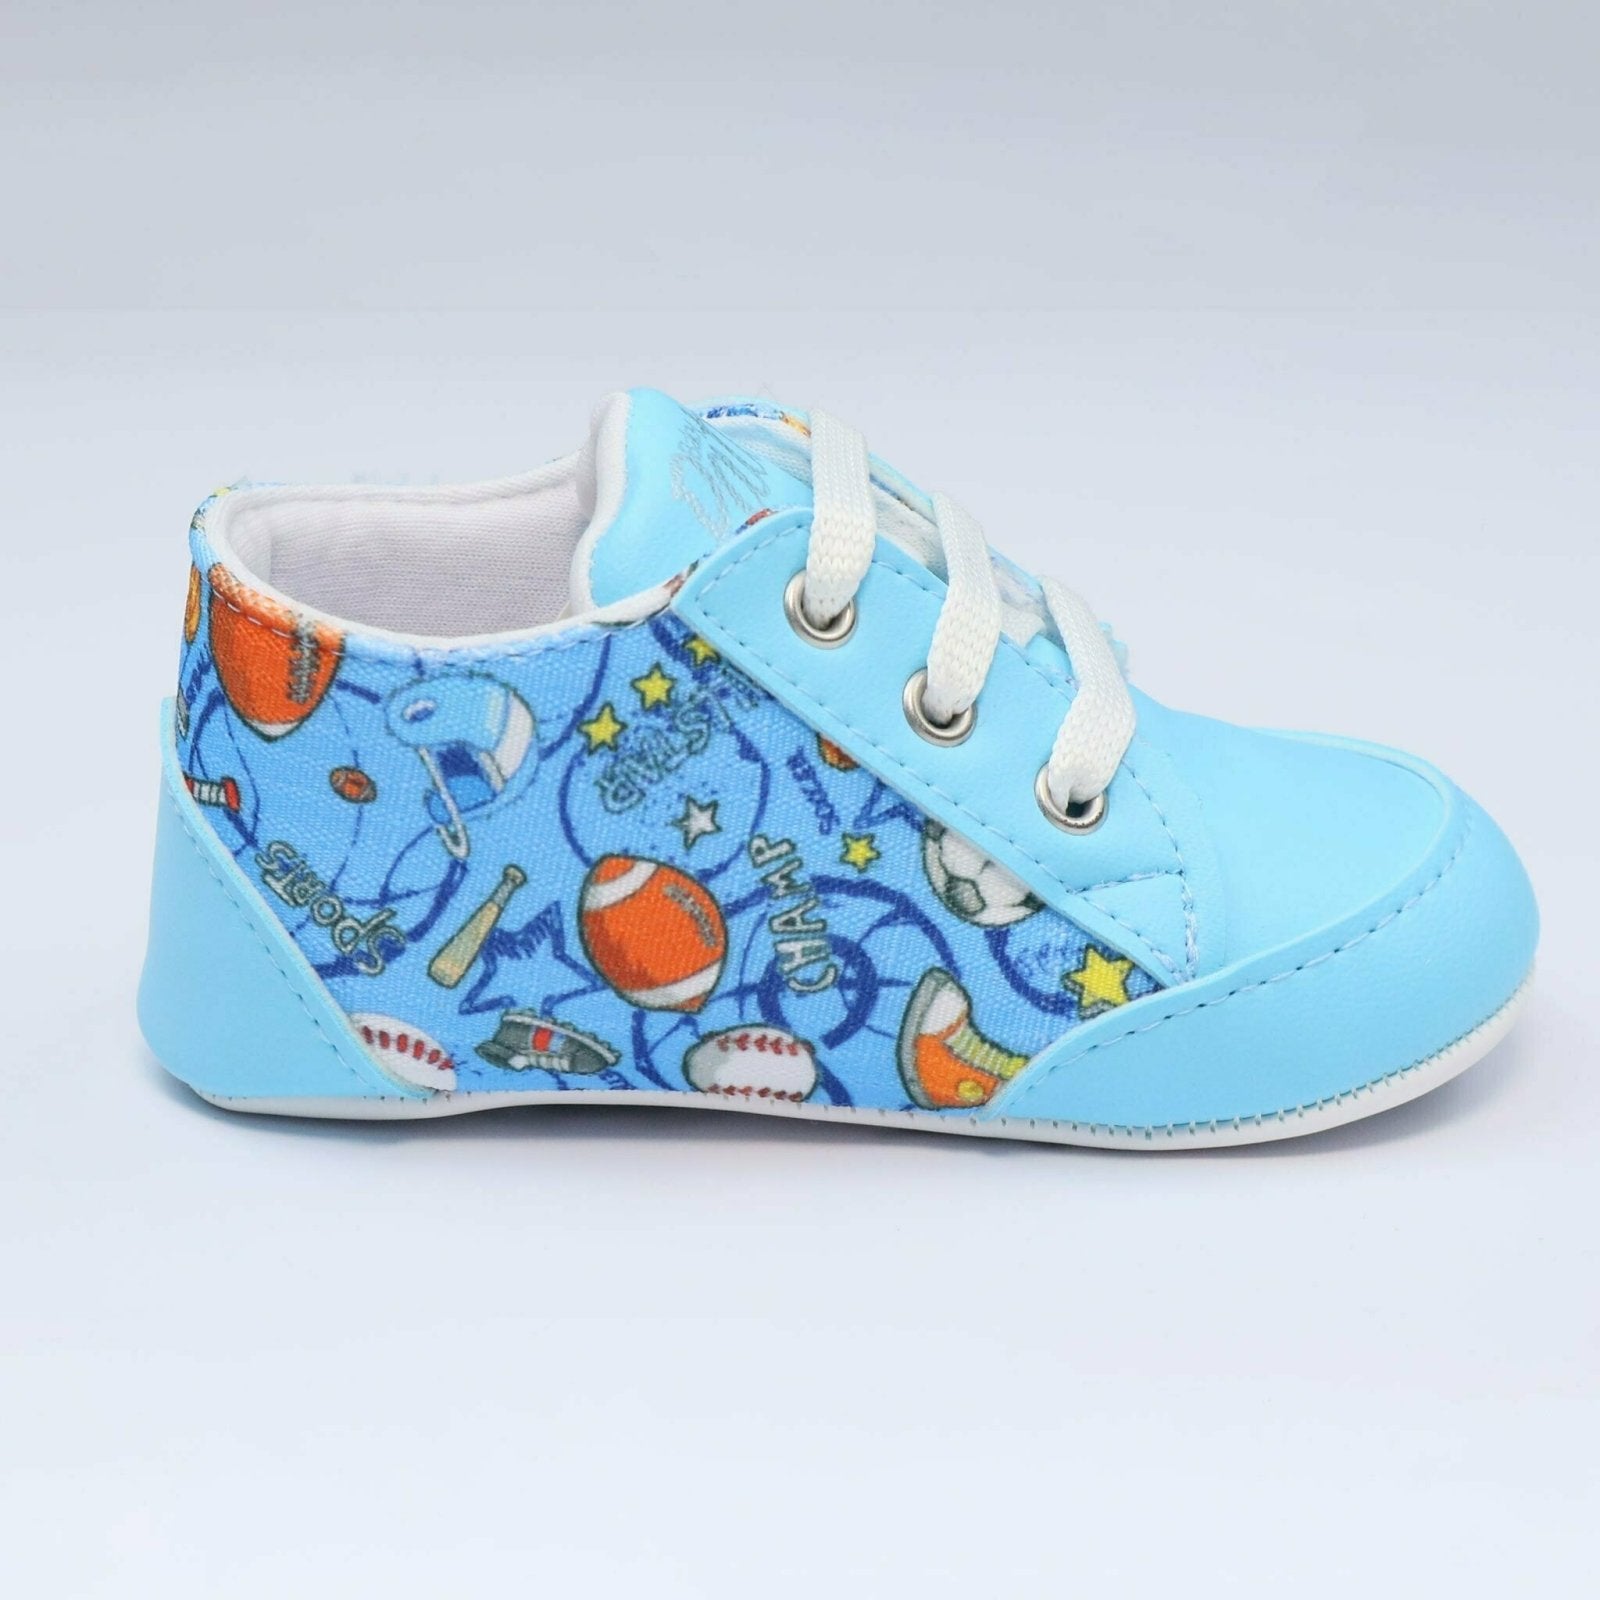 Baby Shoes Sports Print by Baby Pattini